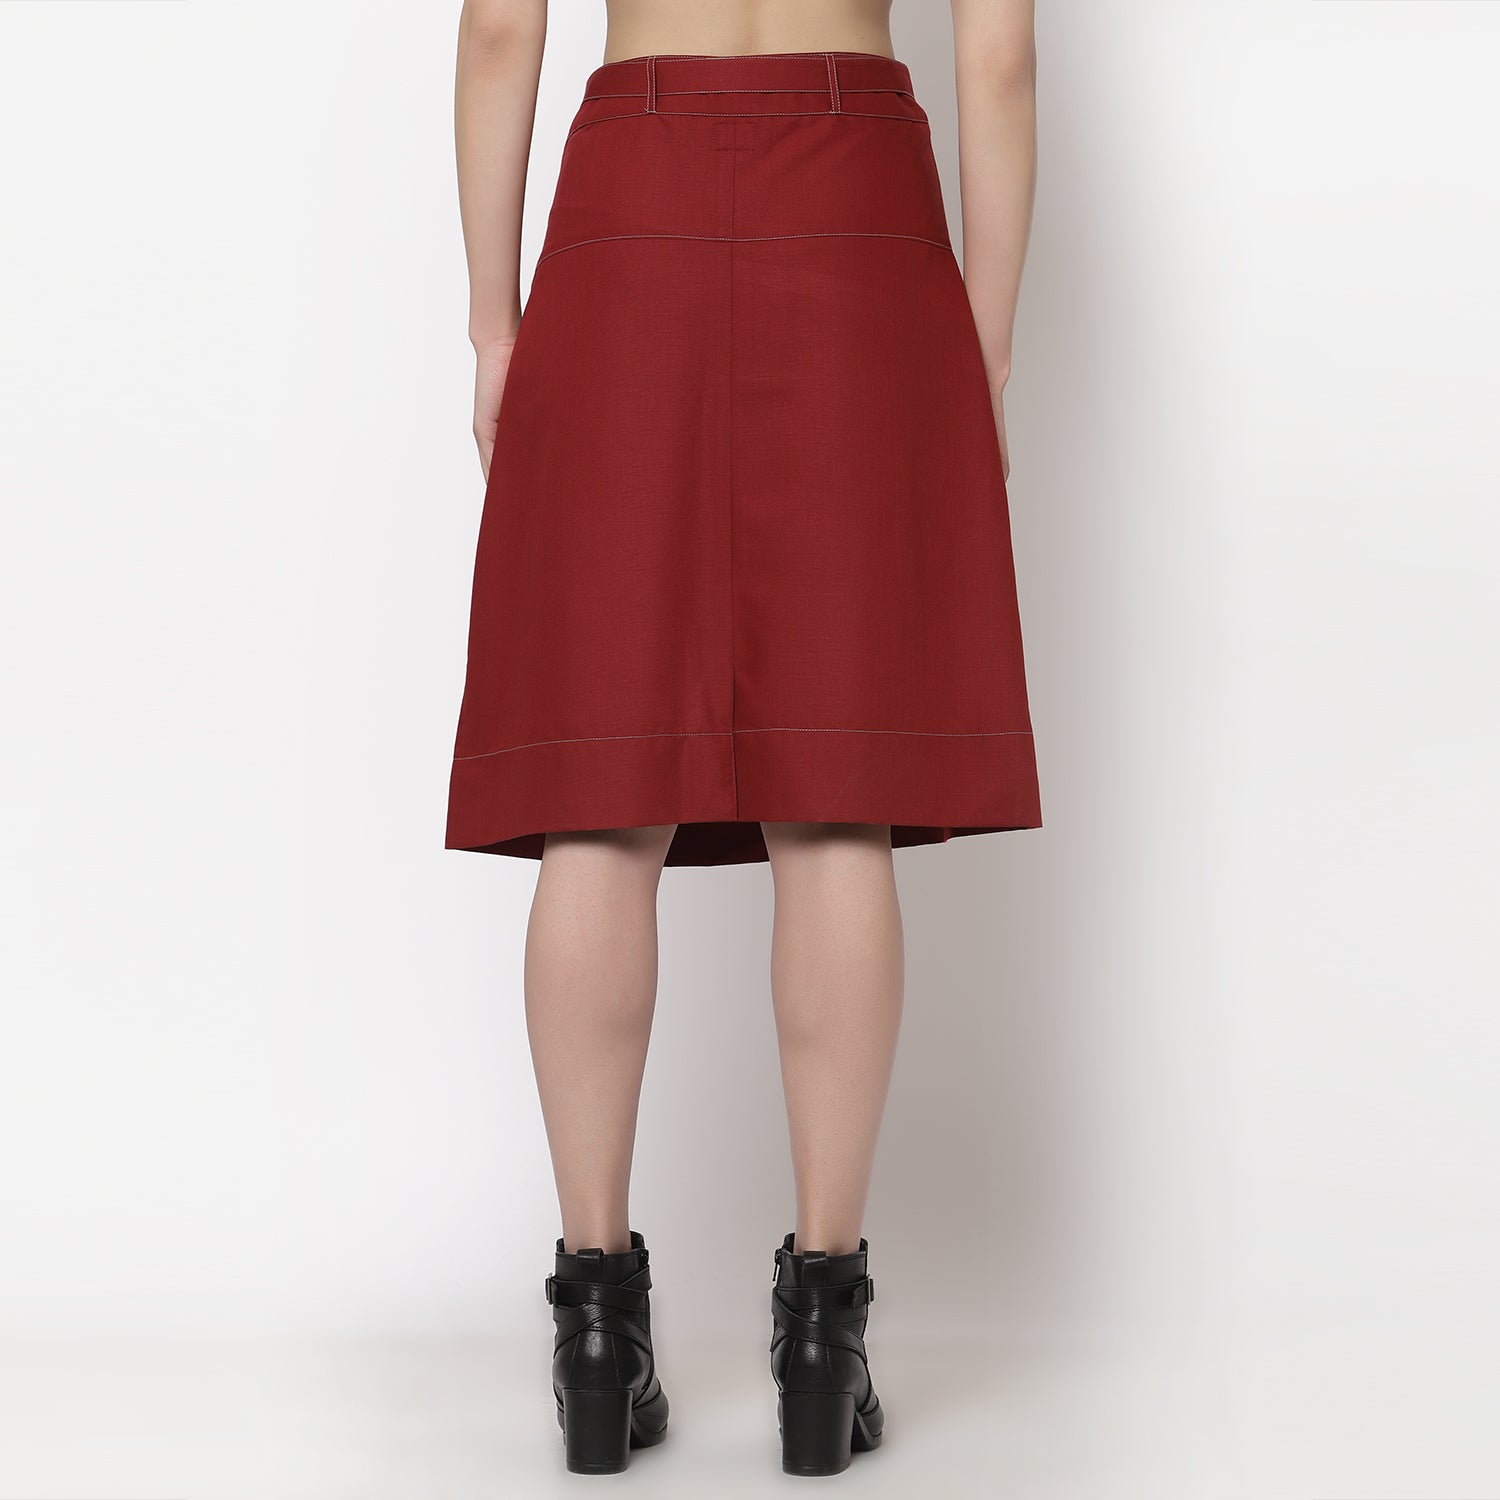 Red Skirt With Grey Top Stitch